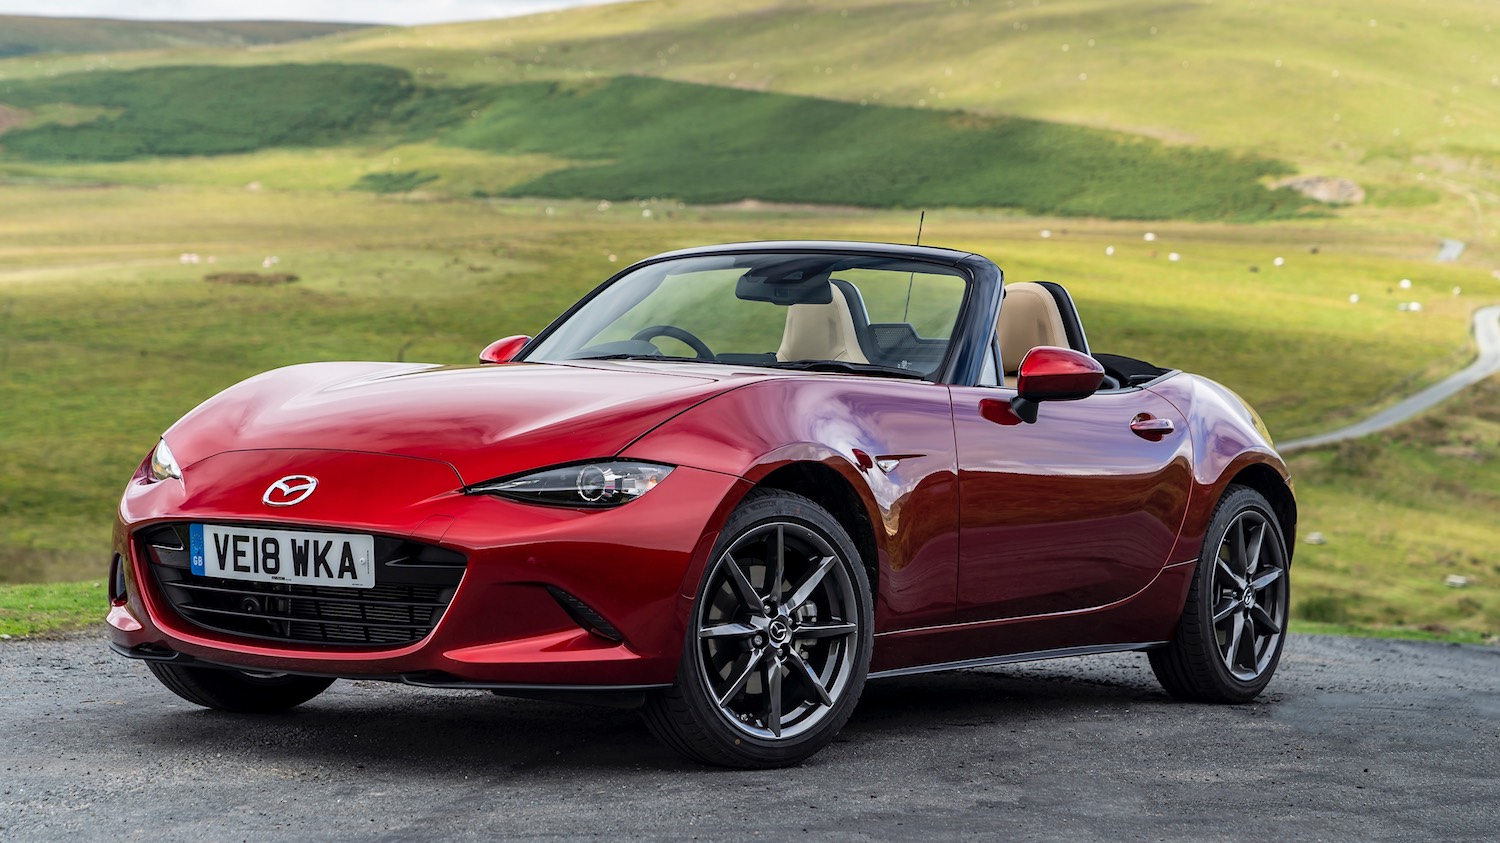 drive-Maggie Barry drives the New 2019 Mazda MX-5 at the lanch event in Ireland 6